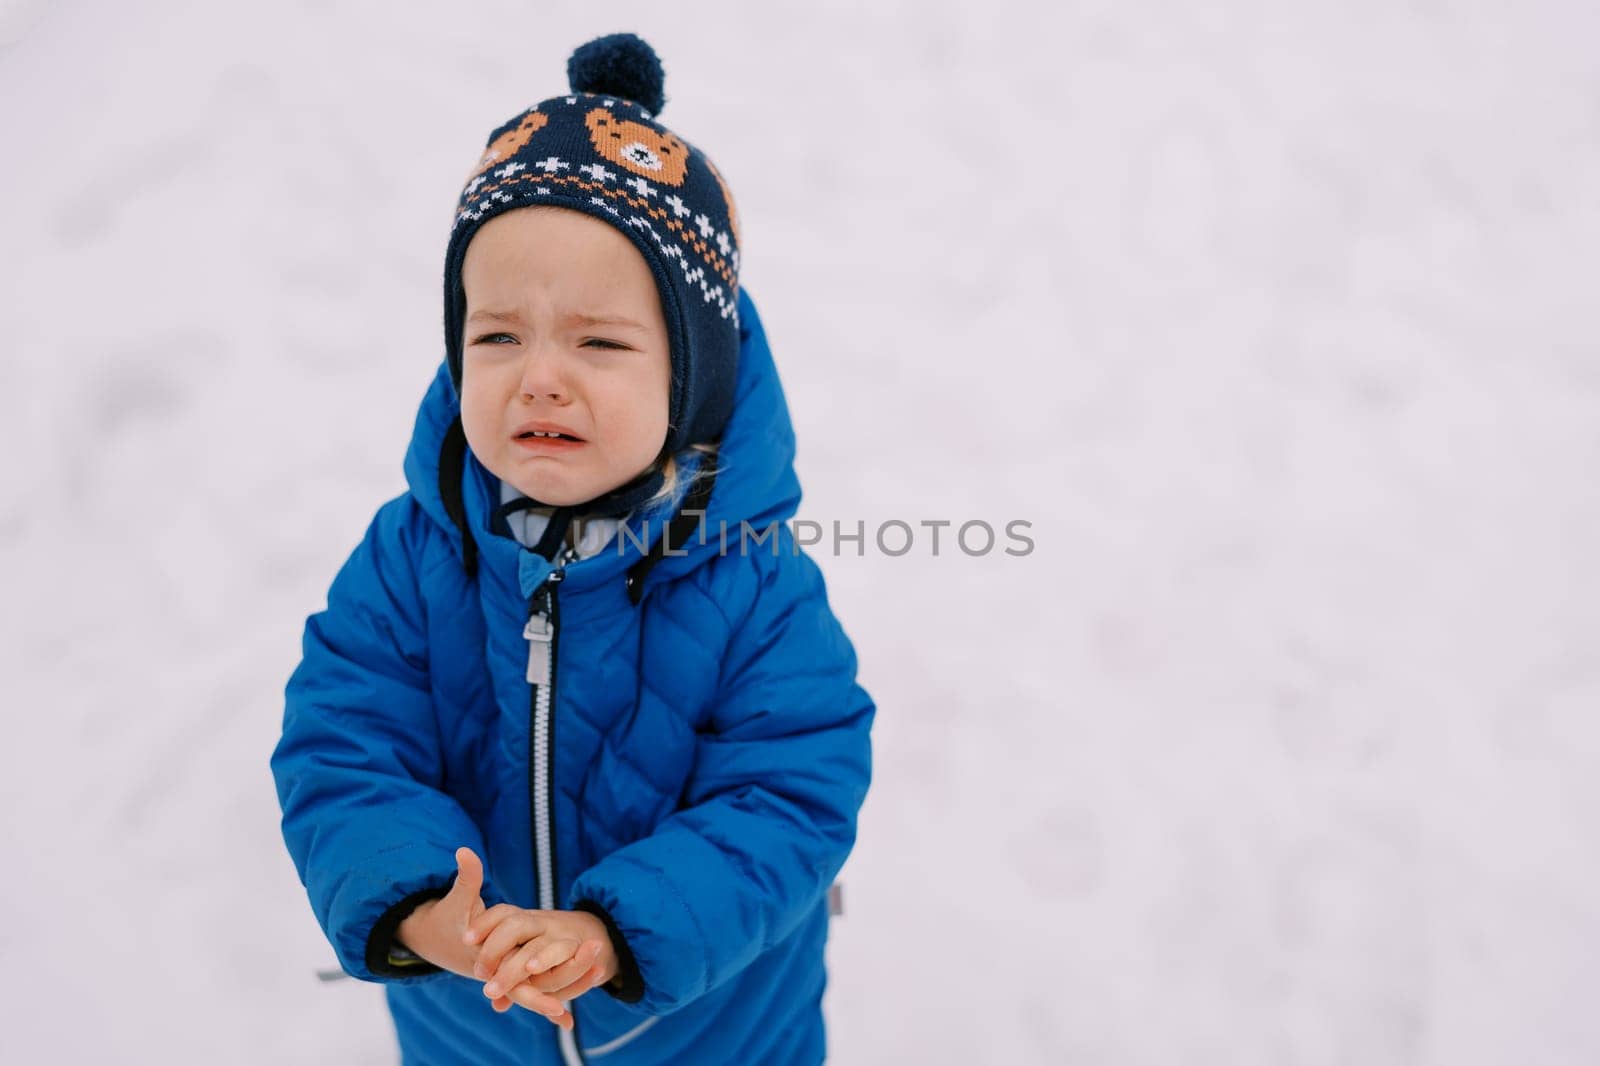 Little girl crying while standing in the snow and holding her hands in front of her by Nadtochiy